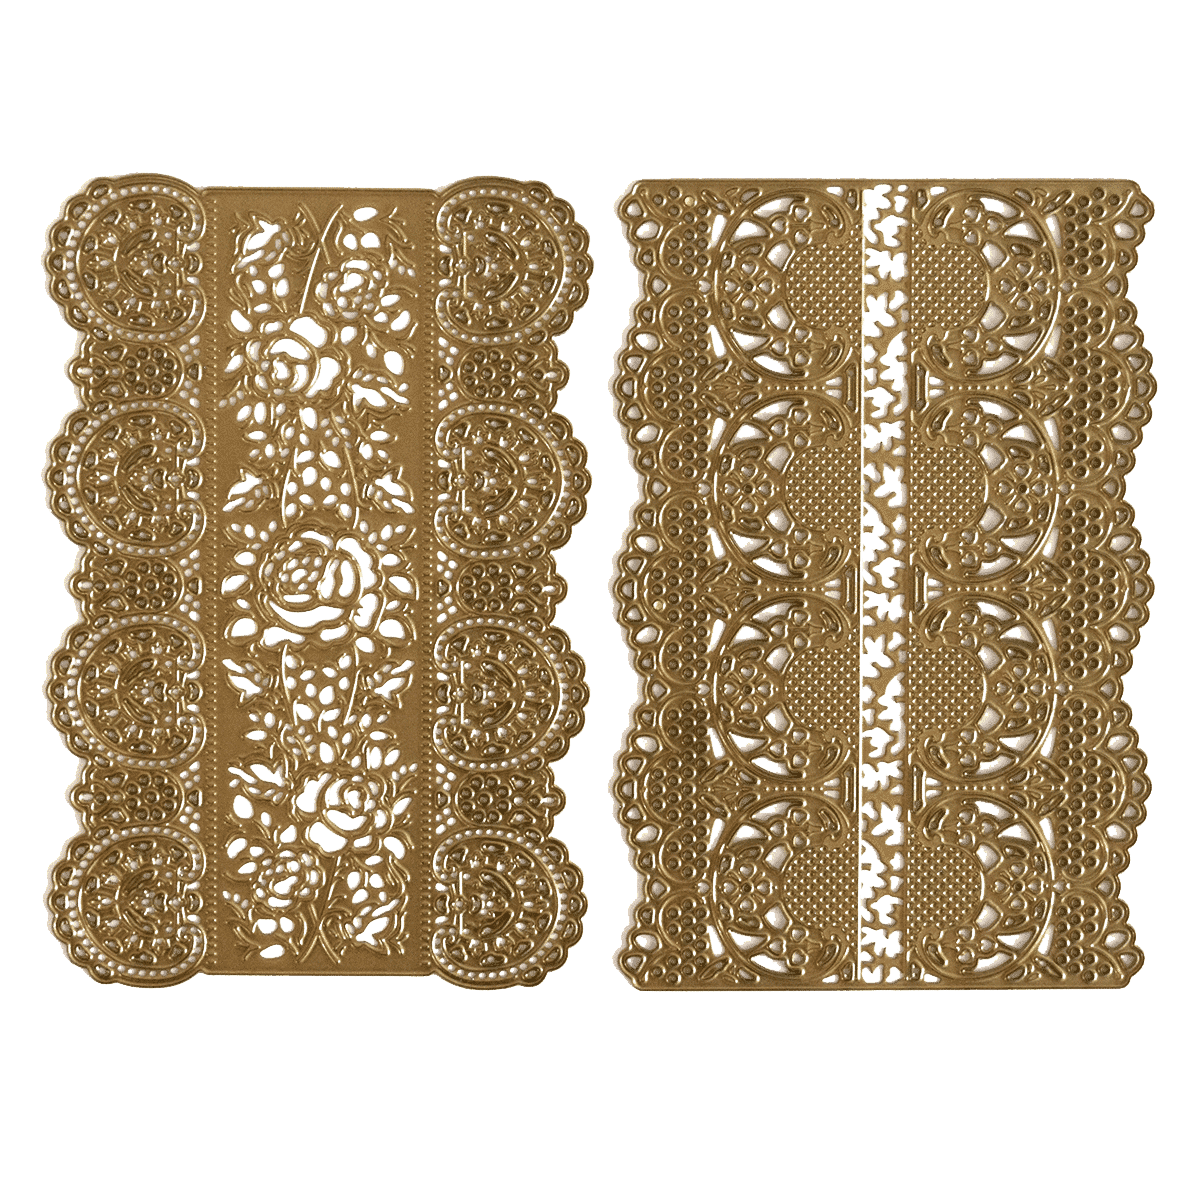 two pieces of lace on a green background.